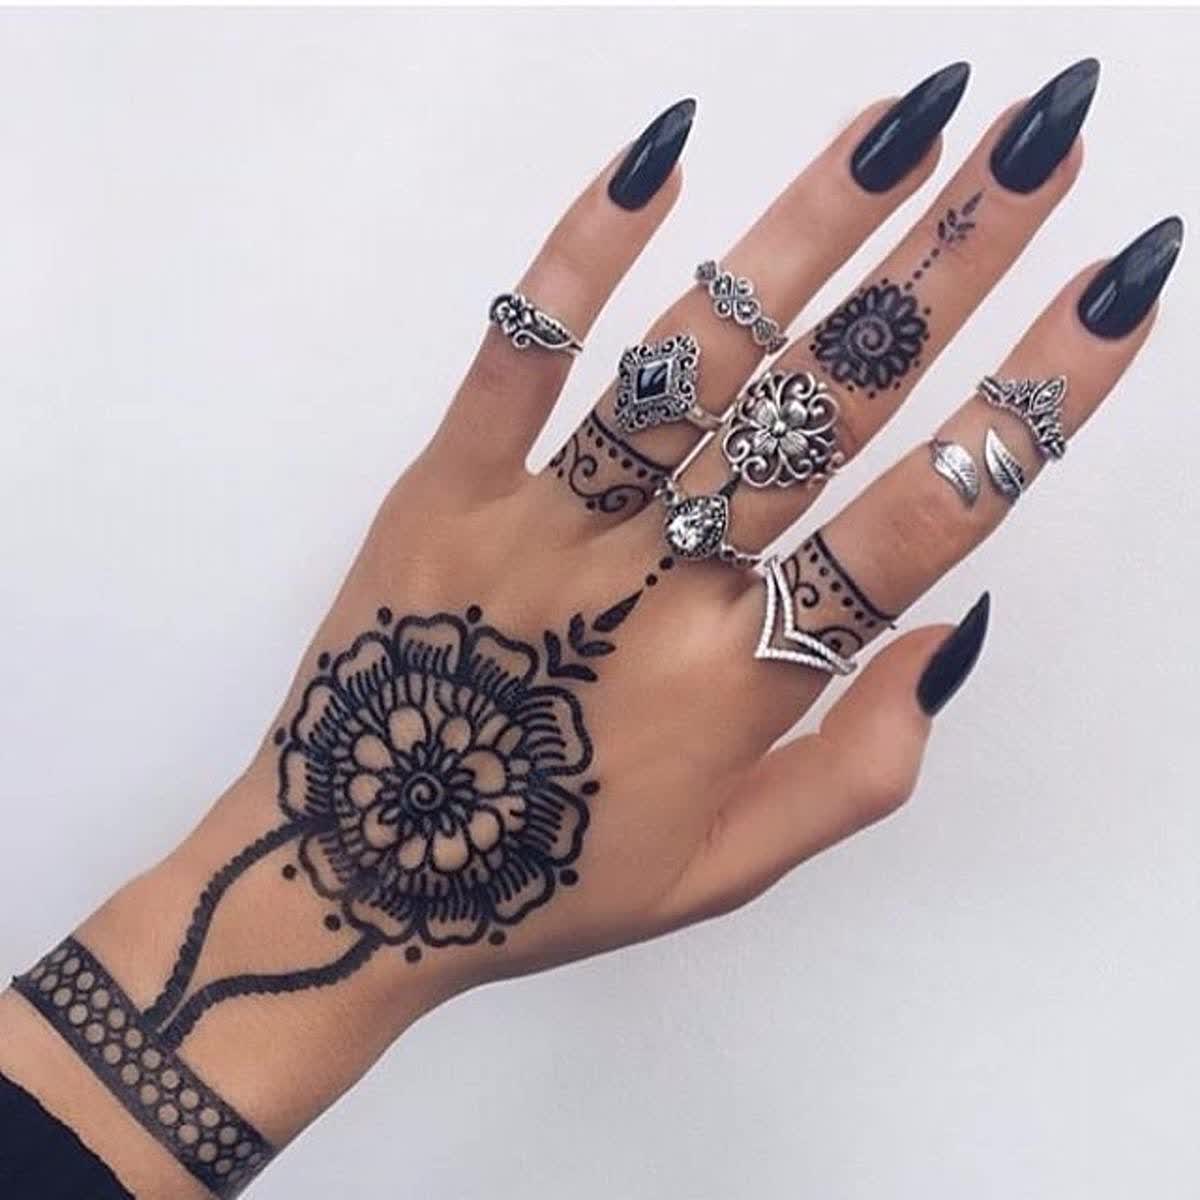 How To Choose A Henna Tattoo Design That Suits You Best